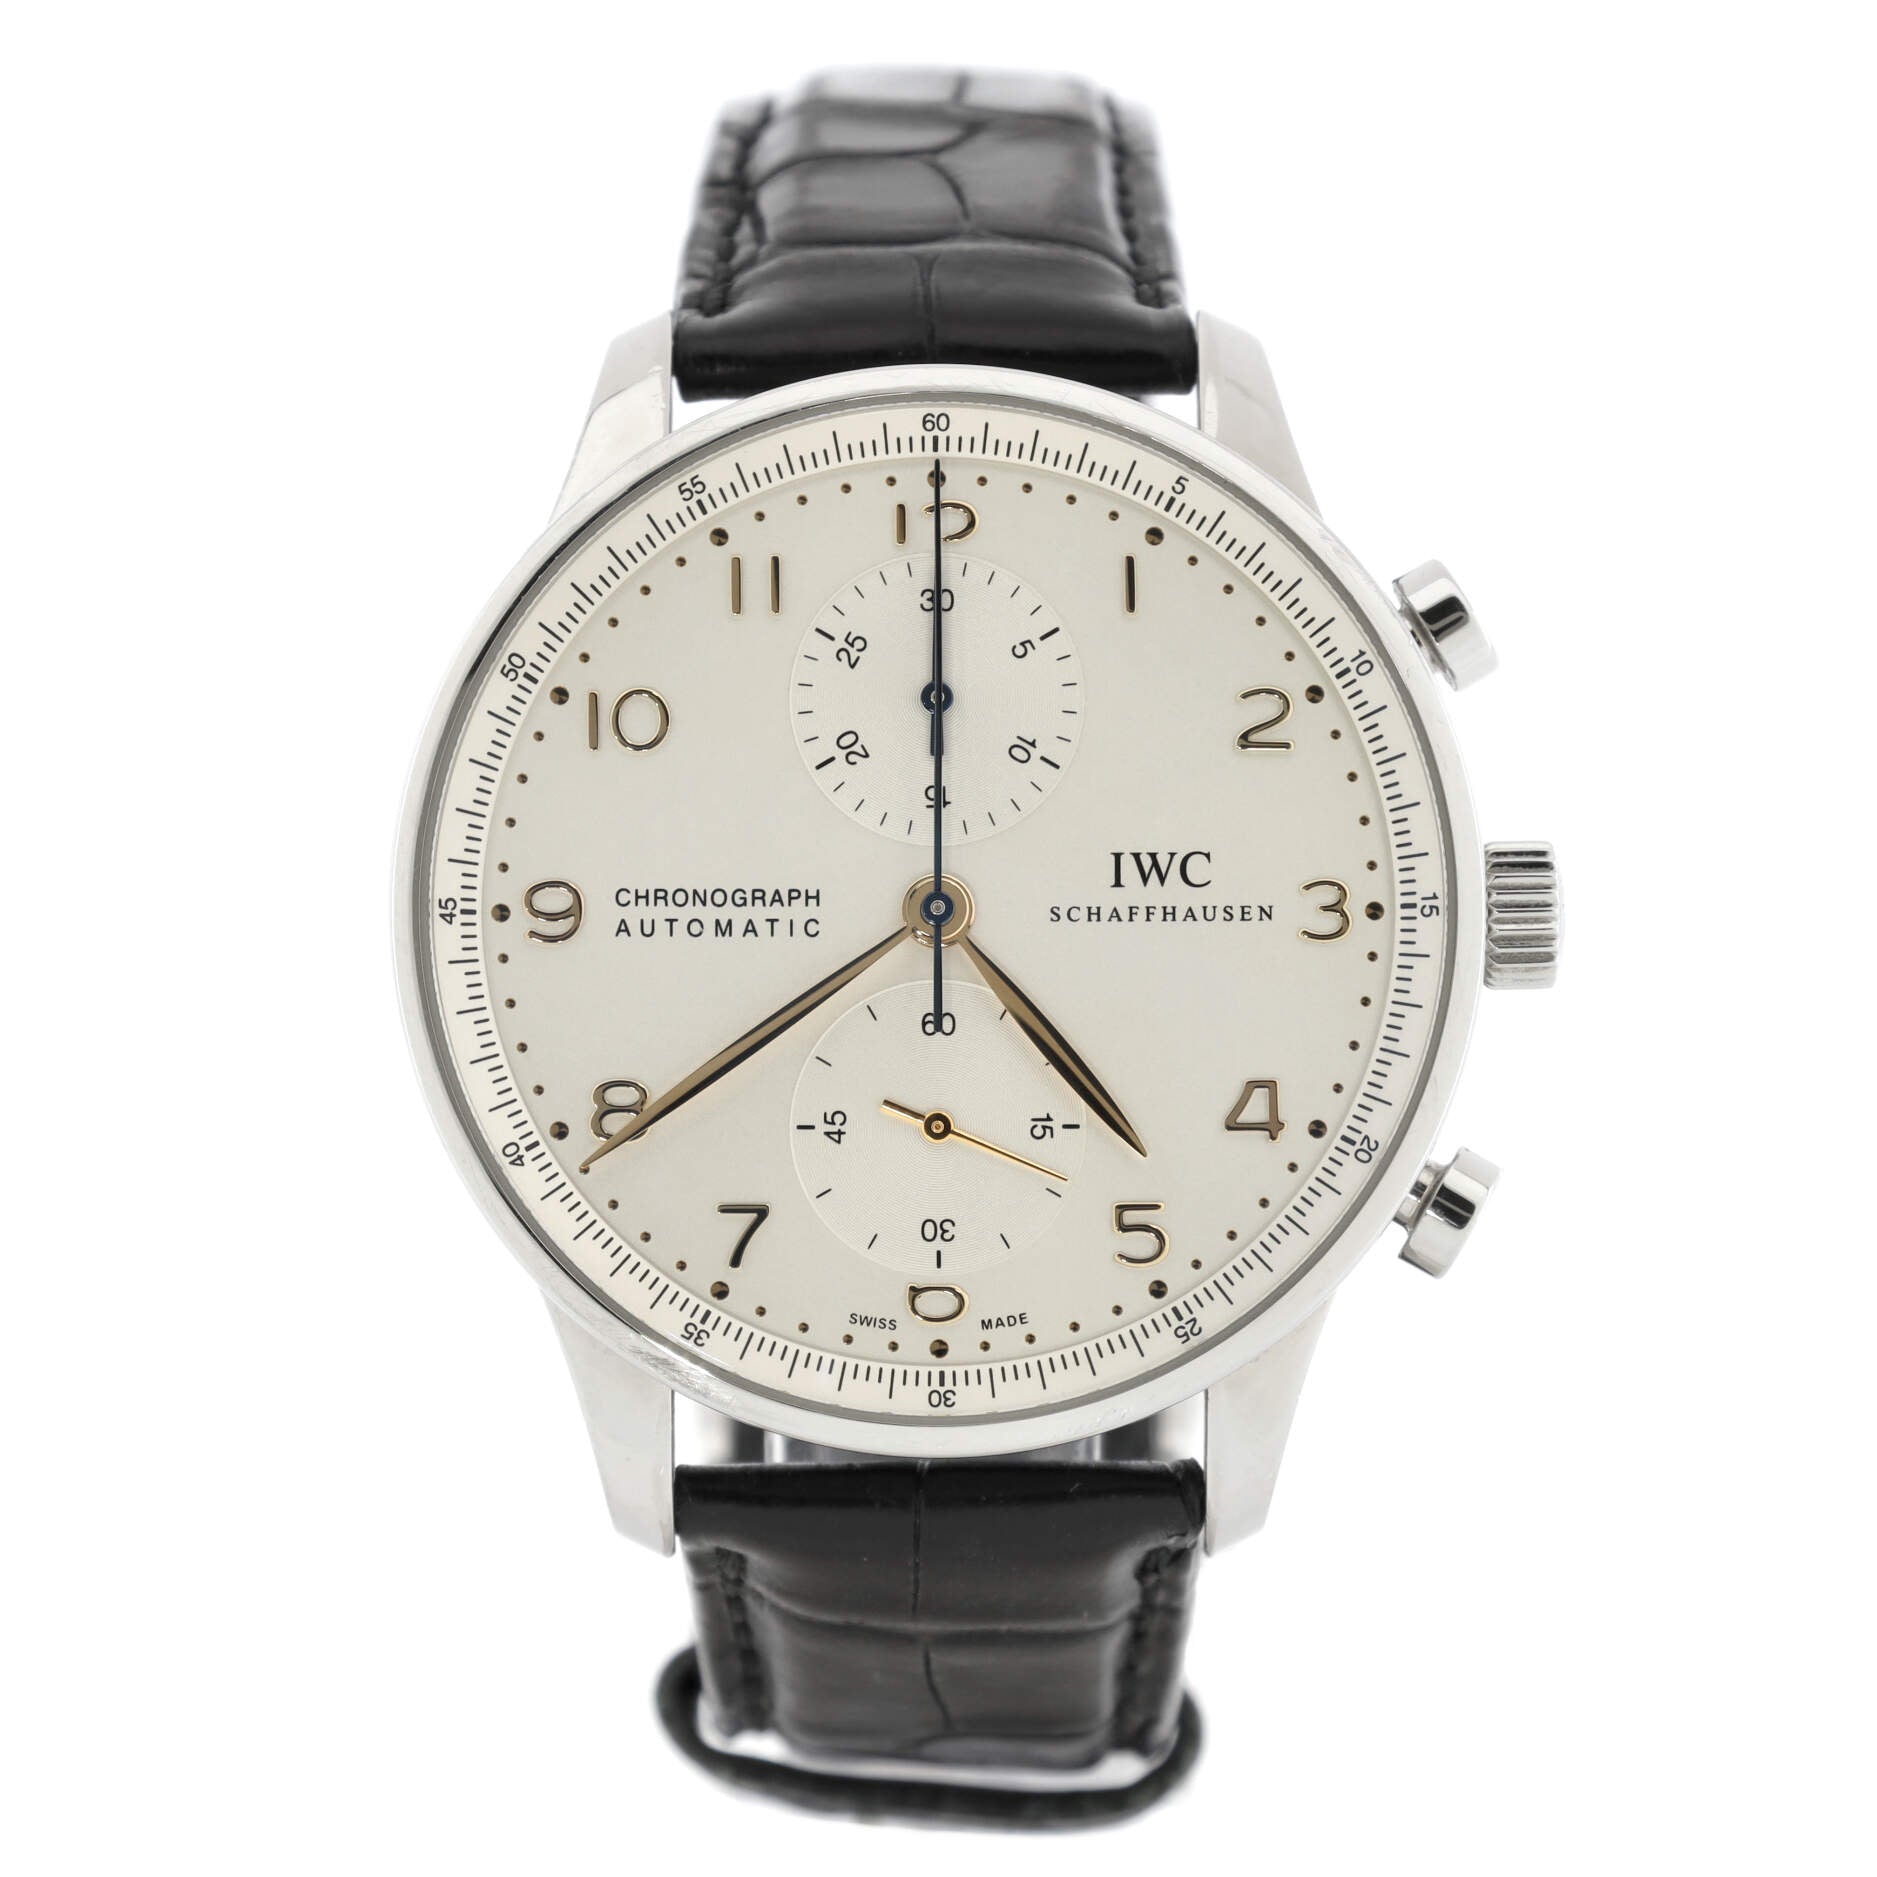 Portugieser Chronograph Automatic Watch (IW3714-001)